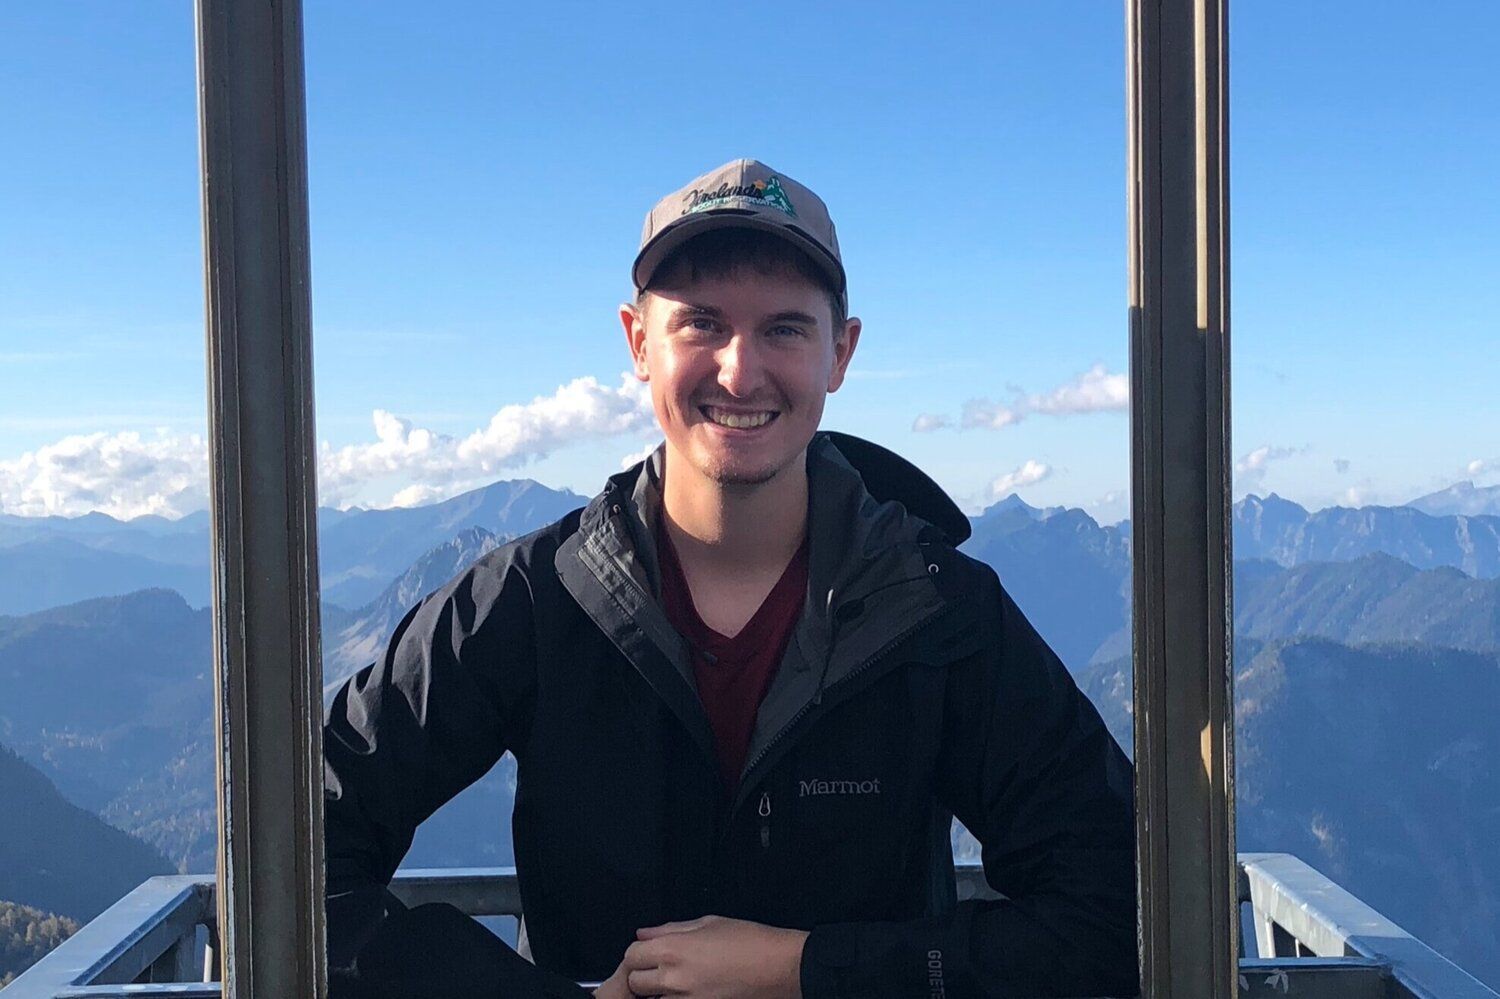 My smiling face in front of Austrian mountains.